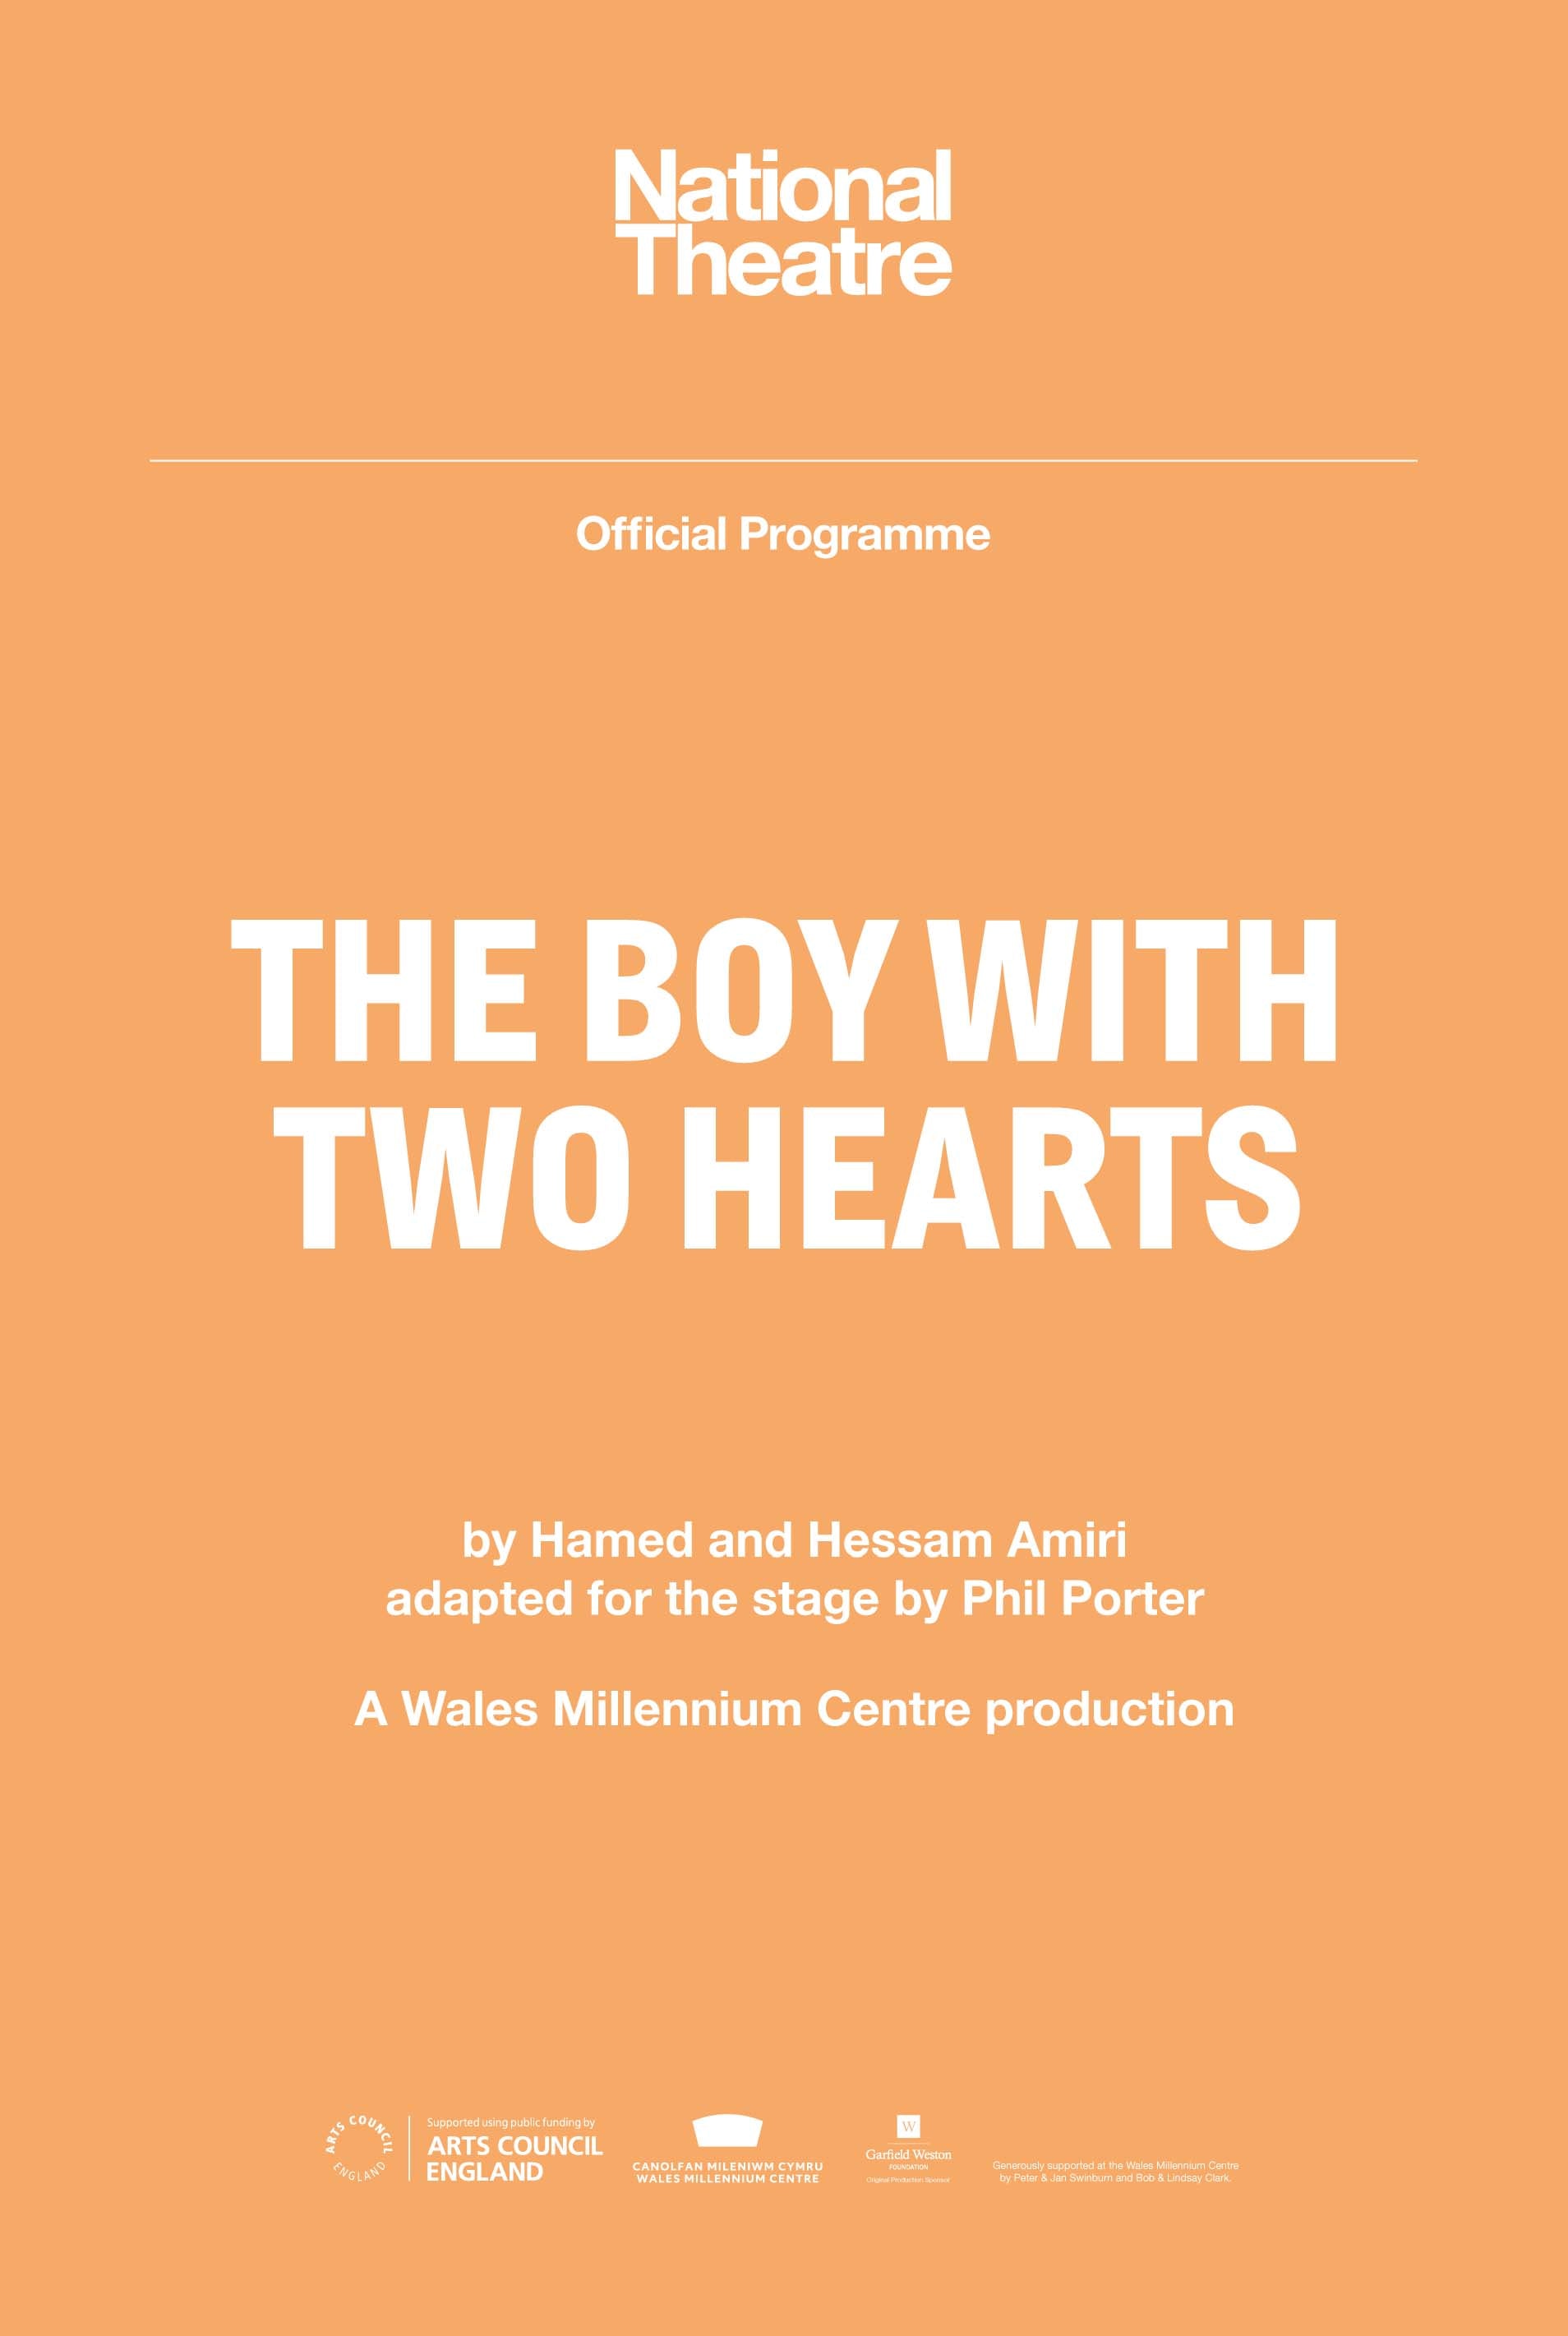 The Boy With Two Hearts Programme